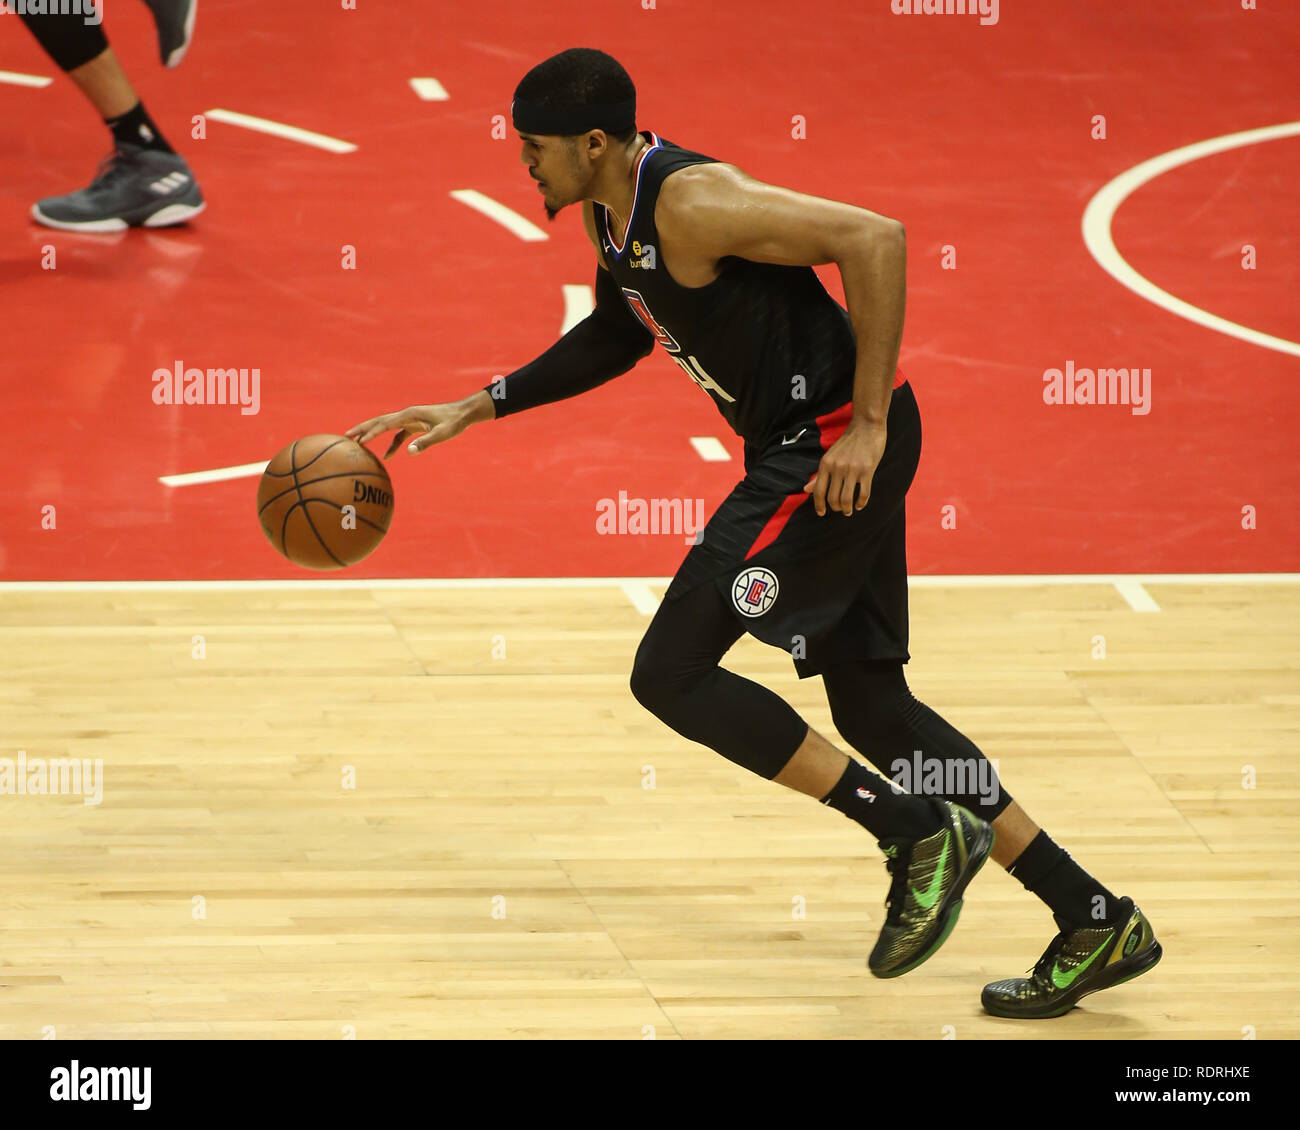 Los Angeles, CA, USA. 18th Jan, 2019. LA Clippers forward Tobias Harris #34 during the Golden State Warriors vs Los Angeles Clippers at Staples Center on January 18, 2019. (Photo by Jevone Moore) Credit: csm/Alamy Live News Stock Photo